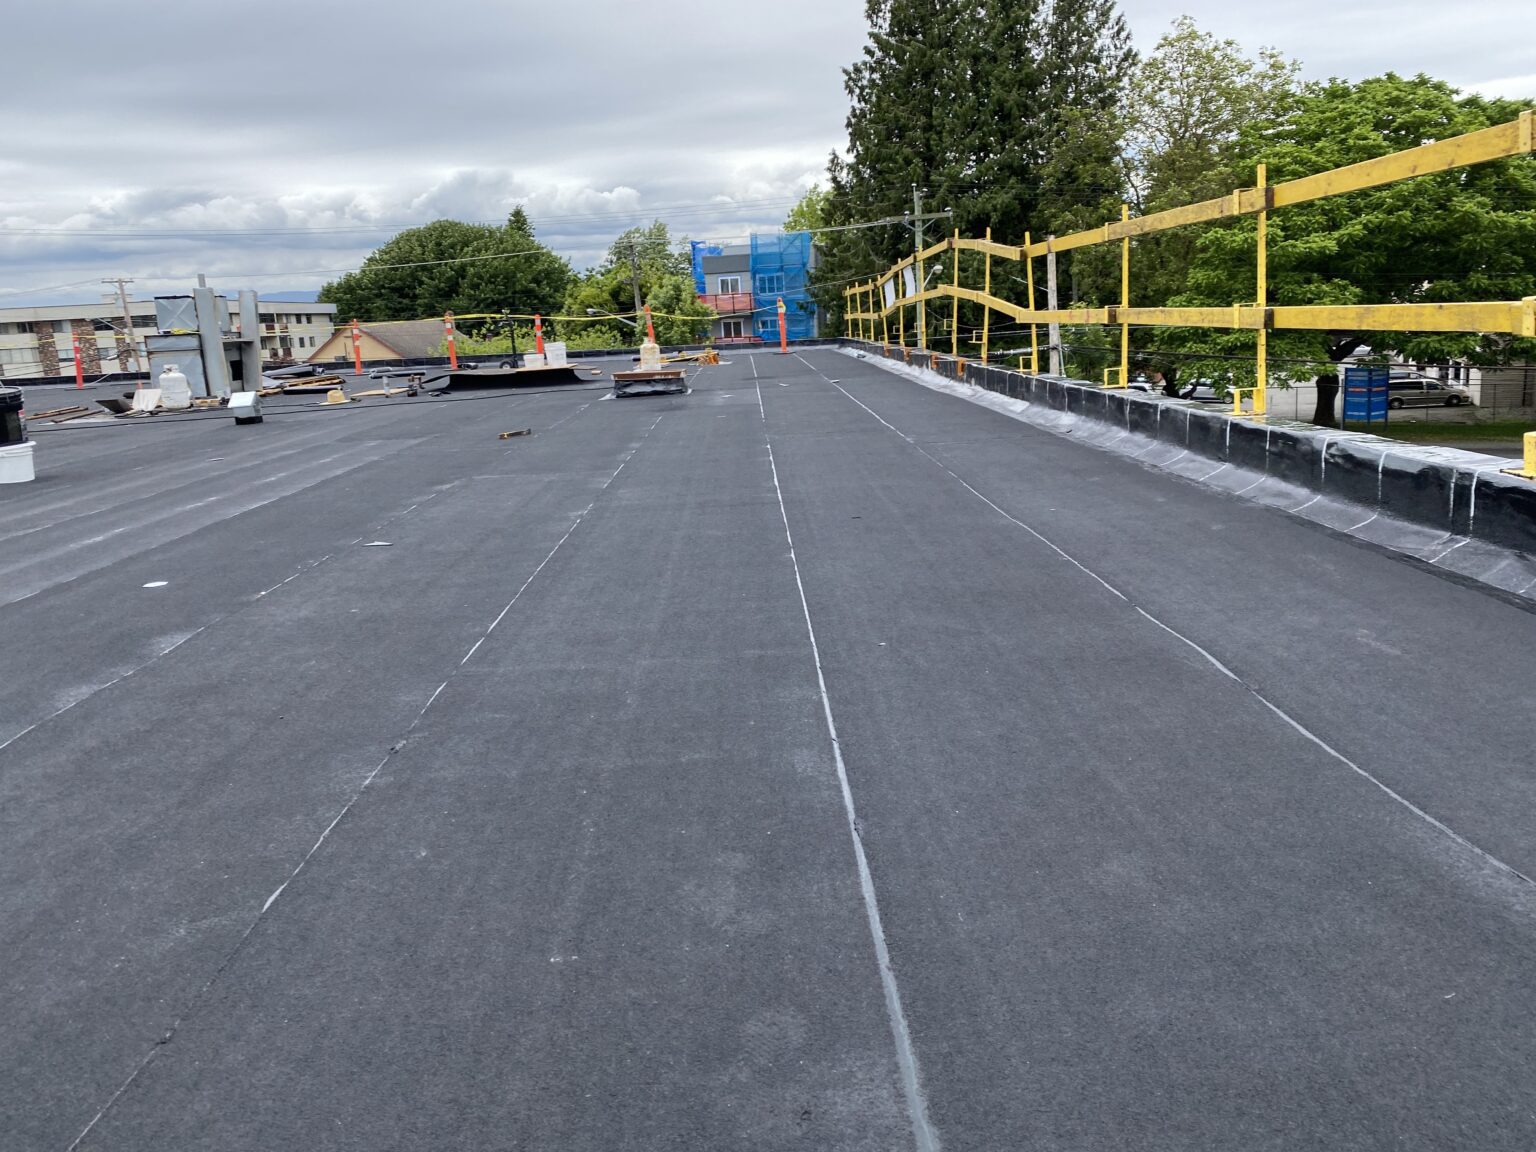 Commercial roofing companies in Vancouver BC